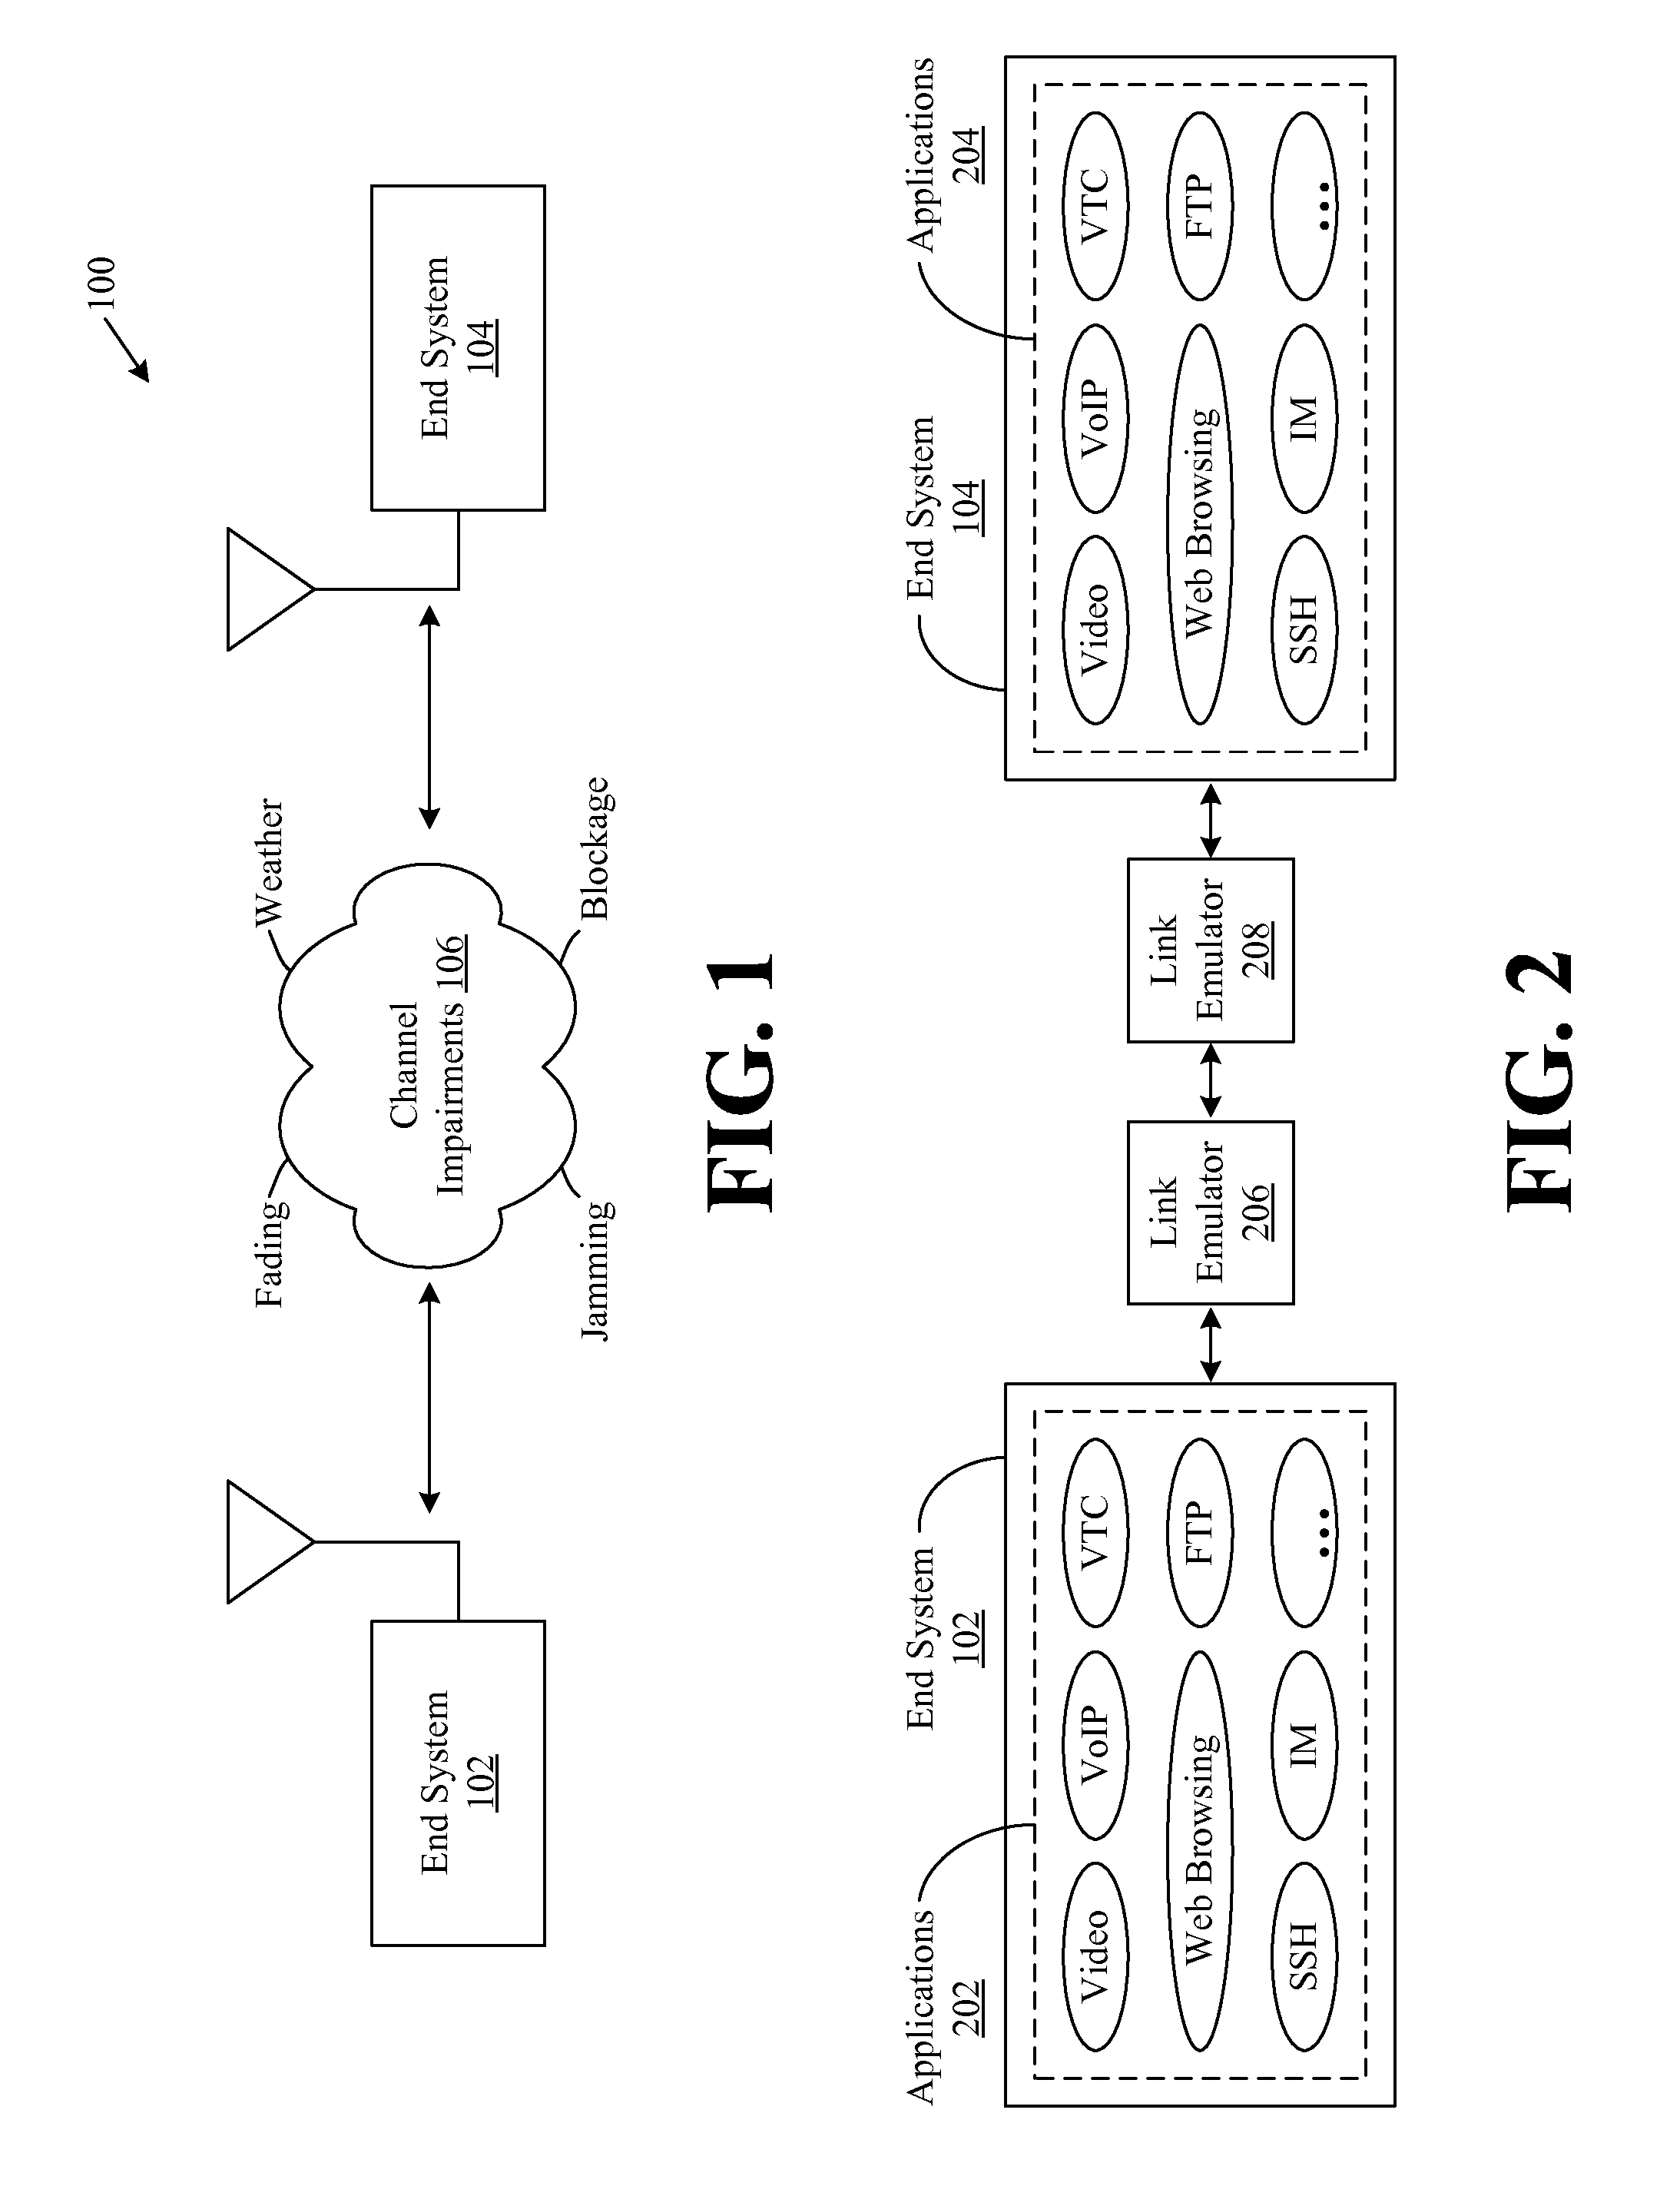 Systems and methods for concurrently emulating multiple channel impairments